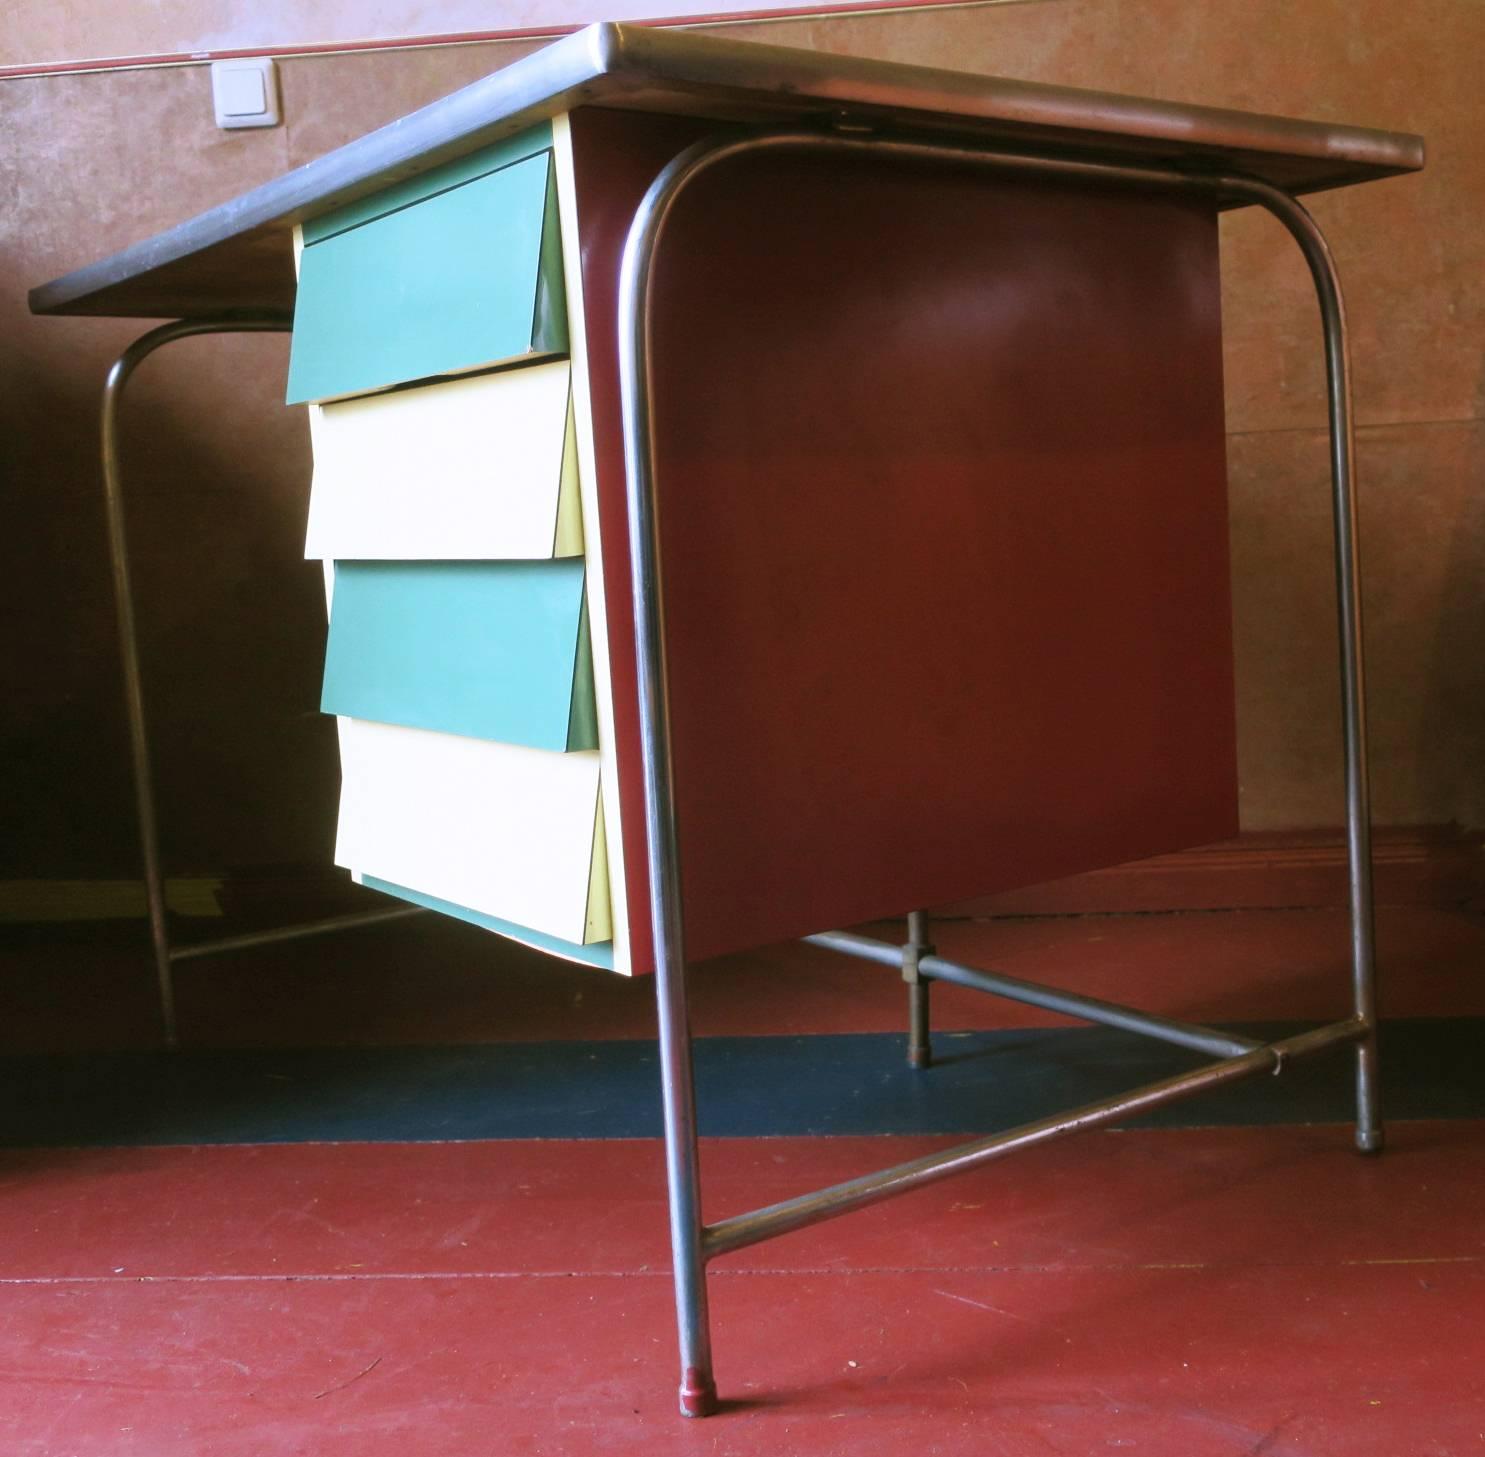 Colorful Italian Tubular Steel and Formica Desk, 1950s-1960s For Sale 7